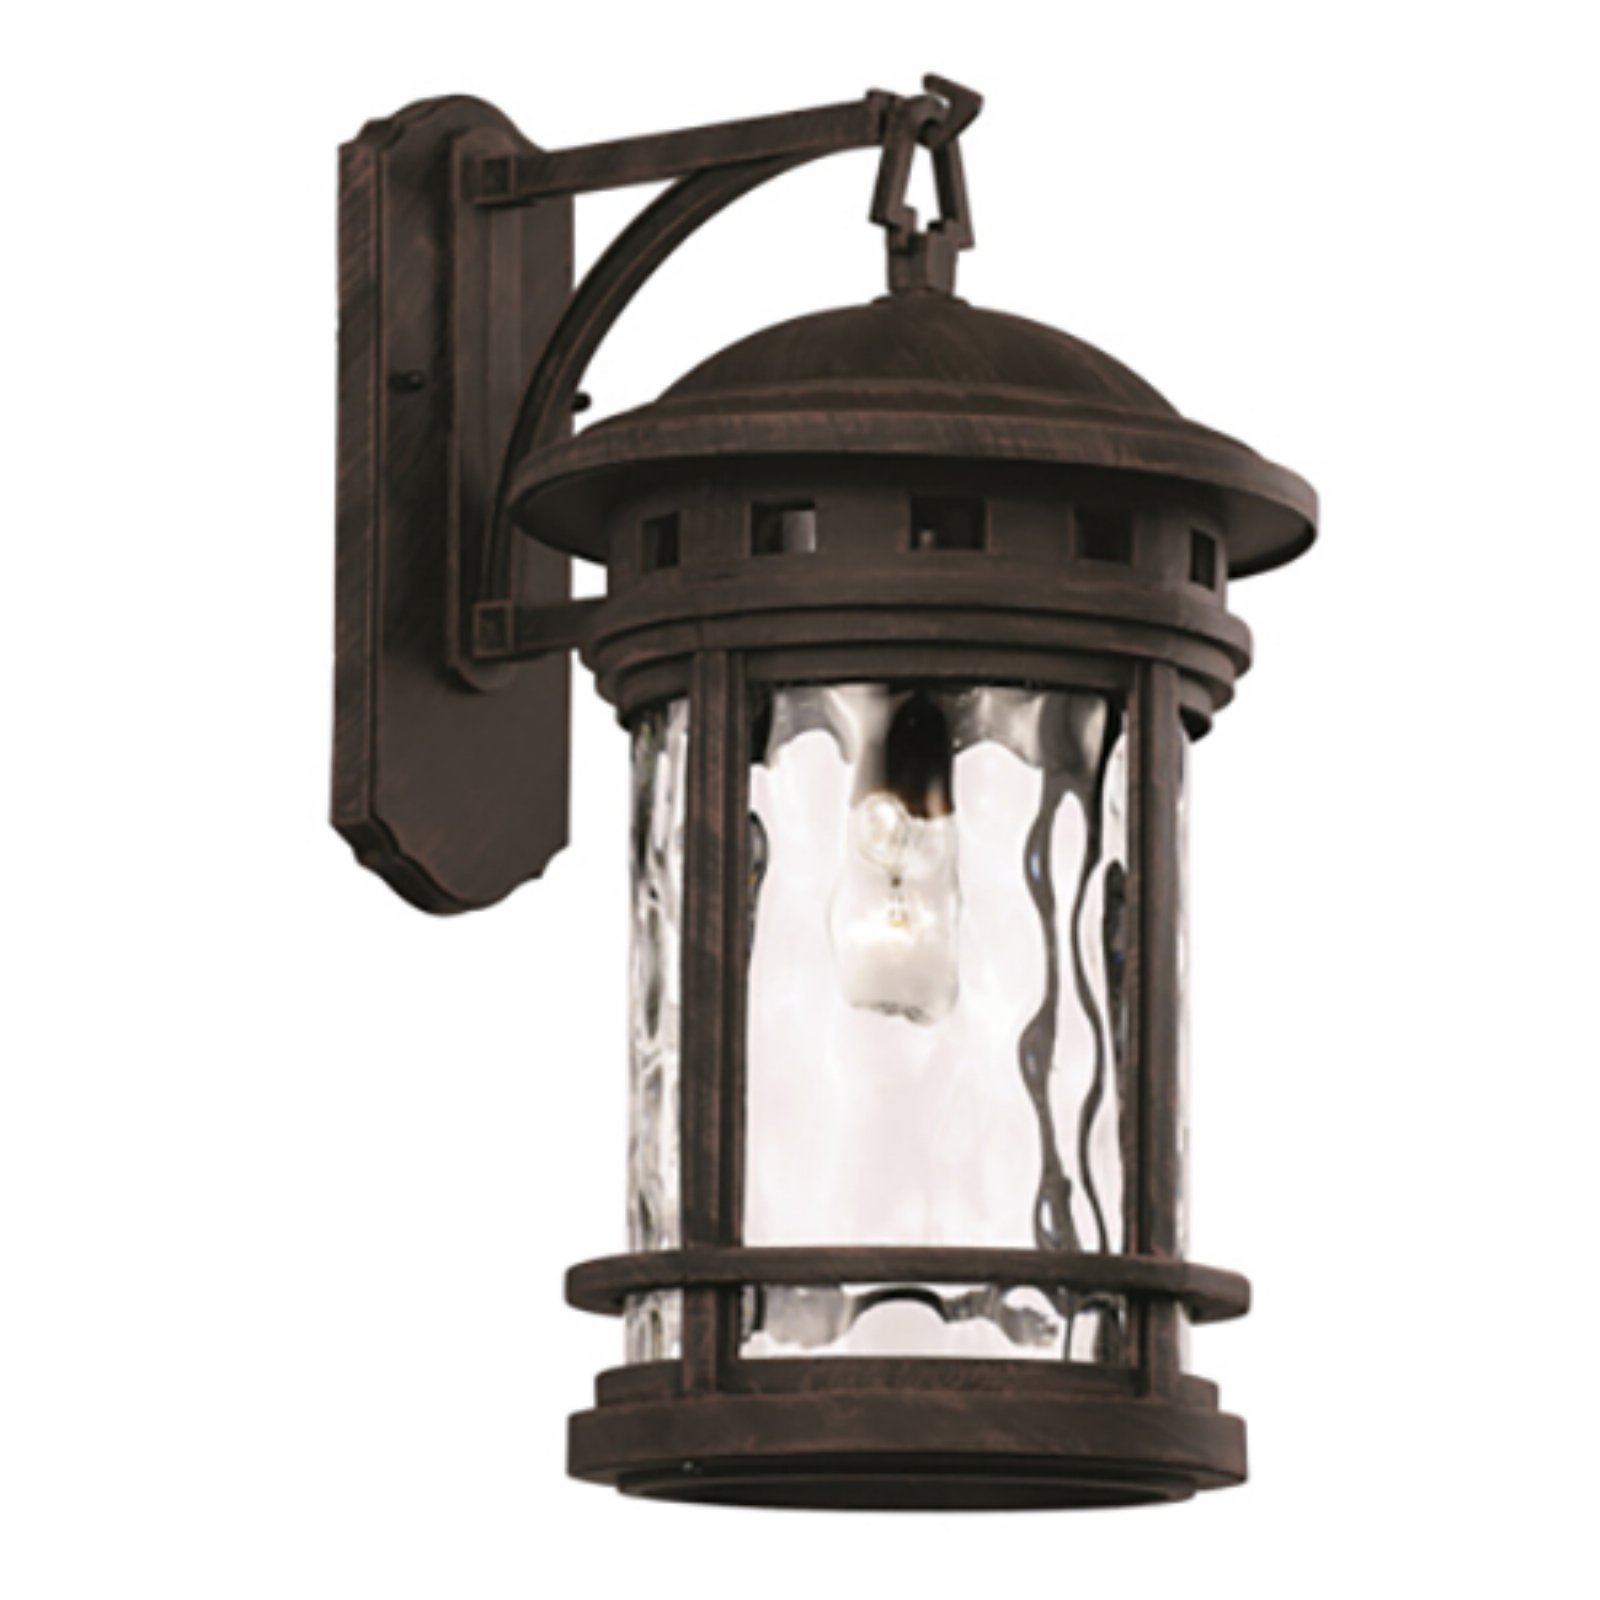 Trans Globe Lighting Boardwalk 4037 Outdoor Wall Lantern with Water Glass - image 2 of 2